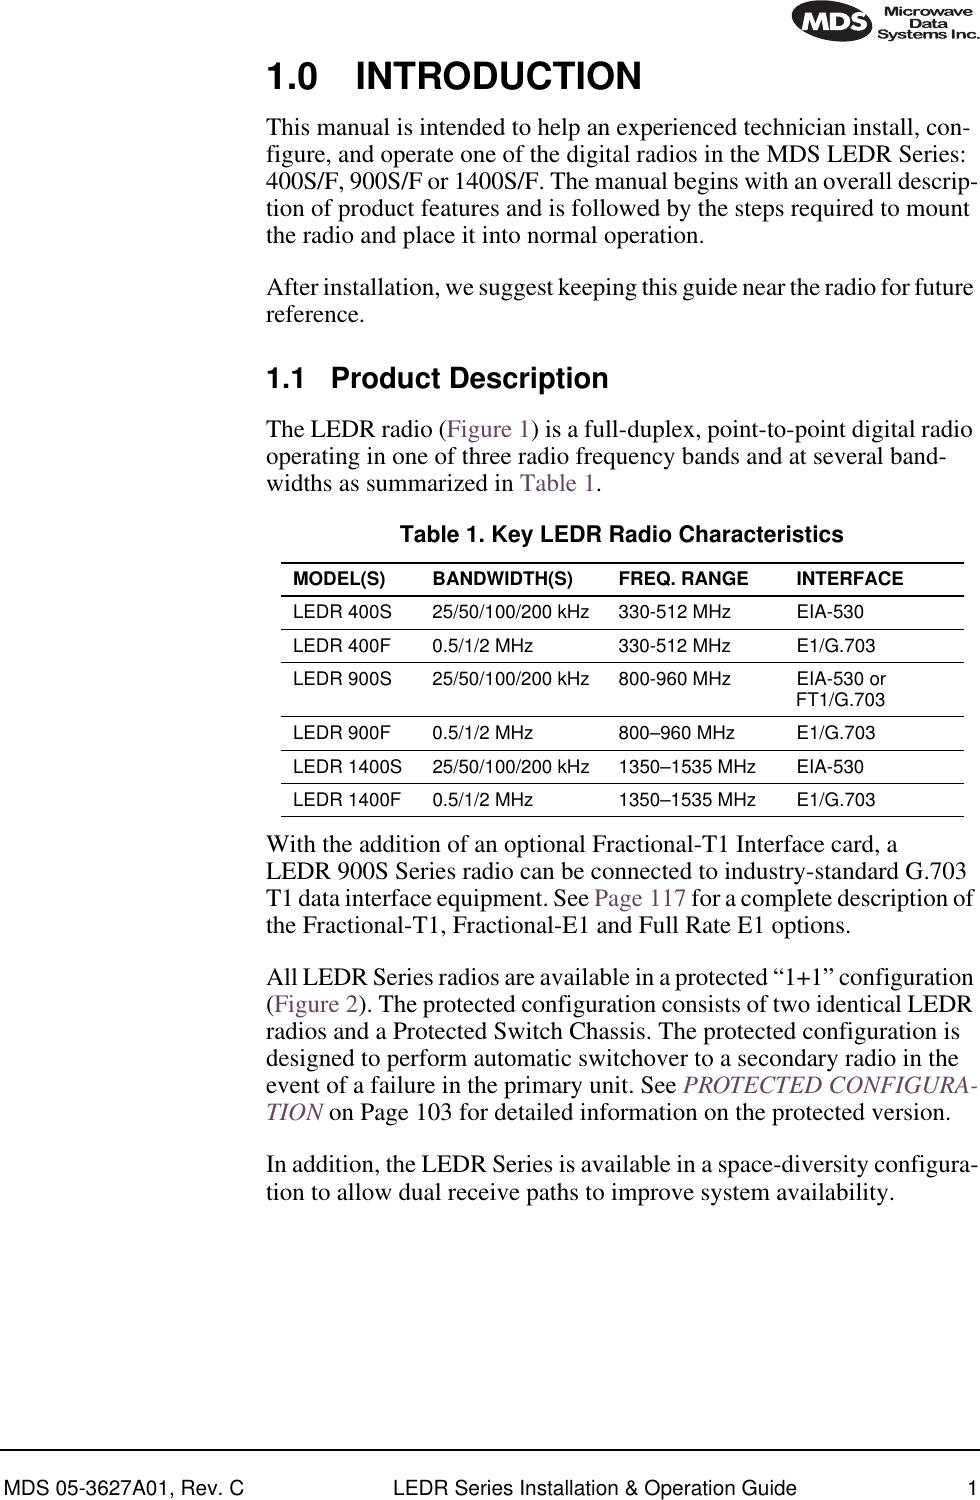  MDS 05-3627A01, Rev. C LEDR Series Installation &amp; Operation Guide 1 1.0 INTRODUCTION This manual is intended to help an experienced technician install, con-figure, and operate one of the digital radios in the MDS LEDR Series: 400S/F, 900S/F or 1400S/F. The manual begins with an overall descrip-tion of product features and is followed by the steps required to mount the radio and place it into normal operation.After installation, we suggest keeping this guide near the radio for future reference. 1.1 Product Description The LEDR radio (Figure 1) is a full-duplex, point-to-point digital radio operating in one of three radio frequency bands and at several band-widths as summarized in Table 1.With the addition of an optional Fractional-T1 Interface card, a LEDR 900S Series radio can be connected to industry-standard G.703 T1 data interface equipment. See Page 117 for a complete description of the Fractional-T1, Fractional-E1 and Full Rate E1 options.All LEDR Series radios are available in a protected “1+1” configuration (Figure 2). The protected configuration consists of two identical LEDR radios and a Protected Switch Chassis. The protected configuration is designed to perform automatic switchover to a secondary radio in the event of a failure in the primary unit. See  PROTECTED CONFIGURA-TION  on Page 103 for detailed information on the protected version.In addition, the LEDR Series is available in a space-diversity configura-tion to allow dual receive paths to improve system availability. Table 1. Key LEDR Radio Characteristics MODEL(S) BANDWIDTH(S) FREQ. RANGE INTERFACE LEDR 400S 25/50/100/200 kHz 330-512 MHz EIA-530LEDR 400F 0.5/1/2 MHz 330-512 MHz E1/G.703LEDR 900S 25/50/100/200 kHz 800-960 MHz EIA-530 orFT1/G.703LEDR 900F 0.5/1/2 MHz 800–960 MHz E1/G.703LEDR 1400S 25/50/100/200 kHz 1350–1535 MHz EIA-530LEDR 1400F 0.5/1/2 MHz 1350–1535 MHz E1/G.703